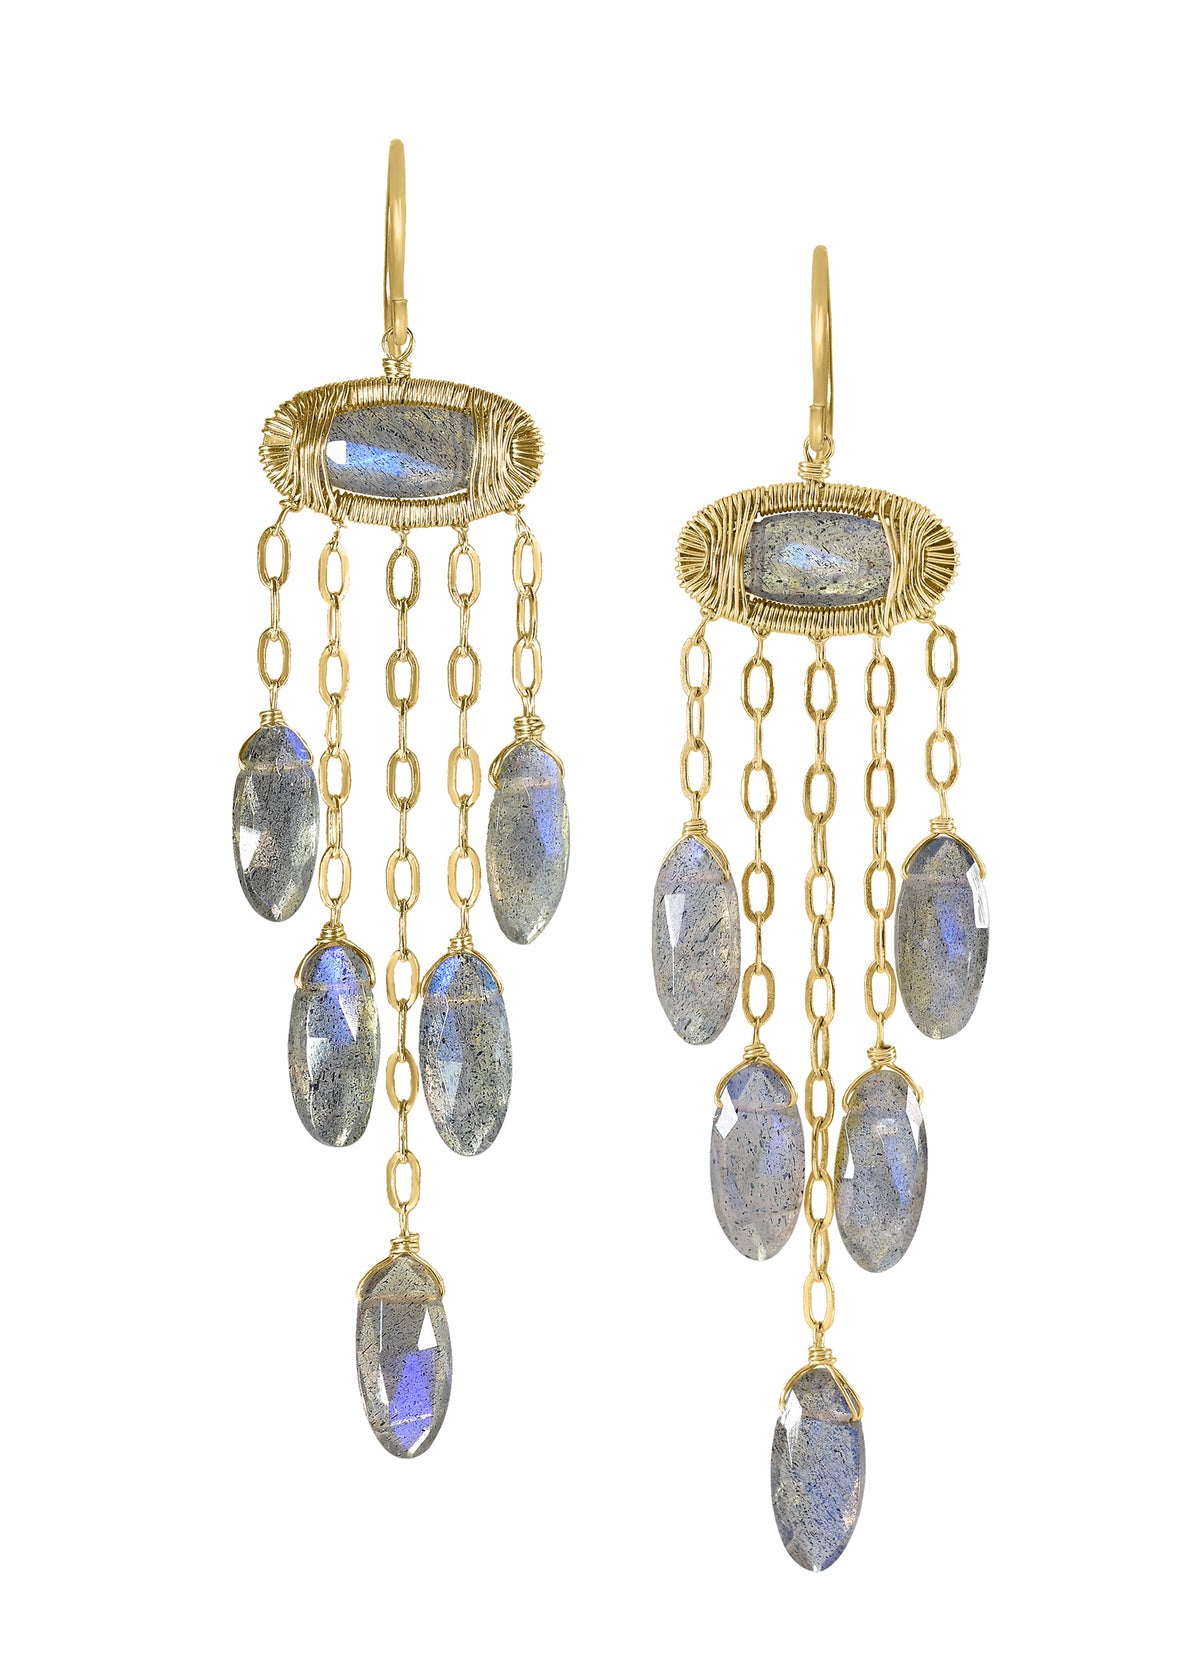 Labradorite 14k gold Earrings measure 2-11/16&quot; in length (including the ear wires) and 5/8&quot; in width across the top pendant Handmade in our Los Angeles studio